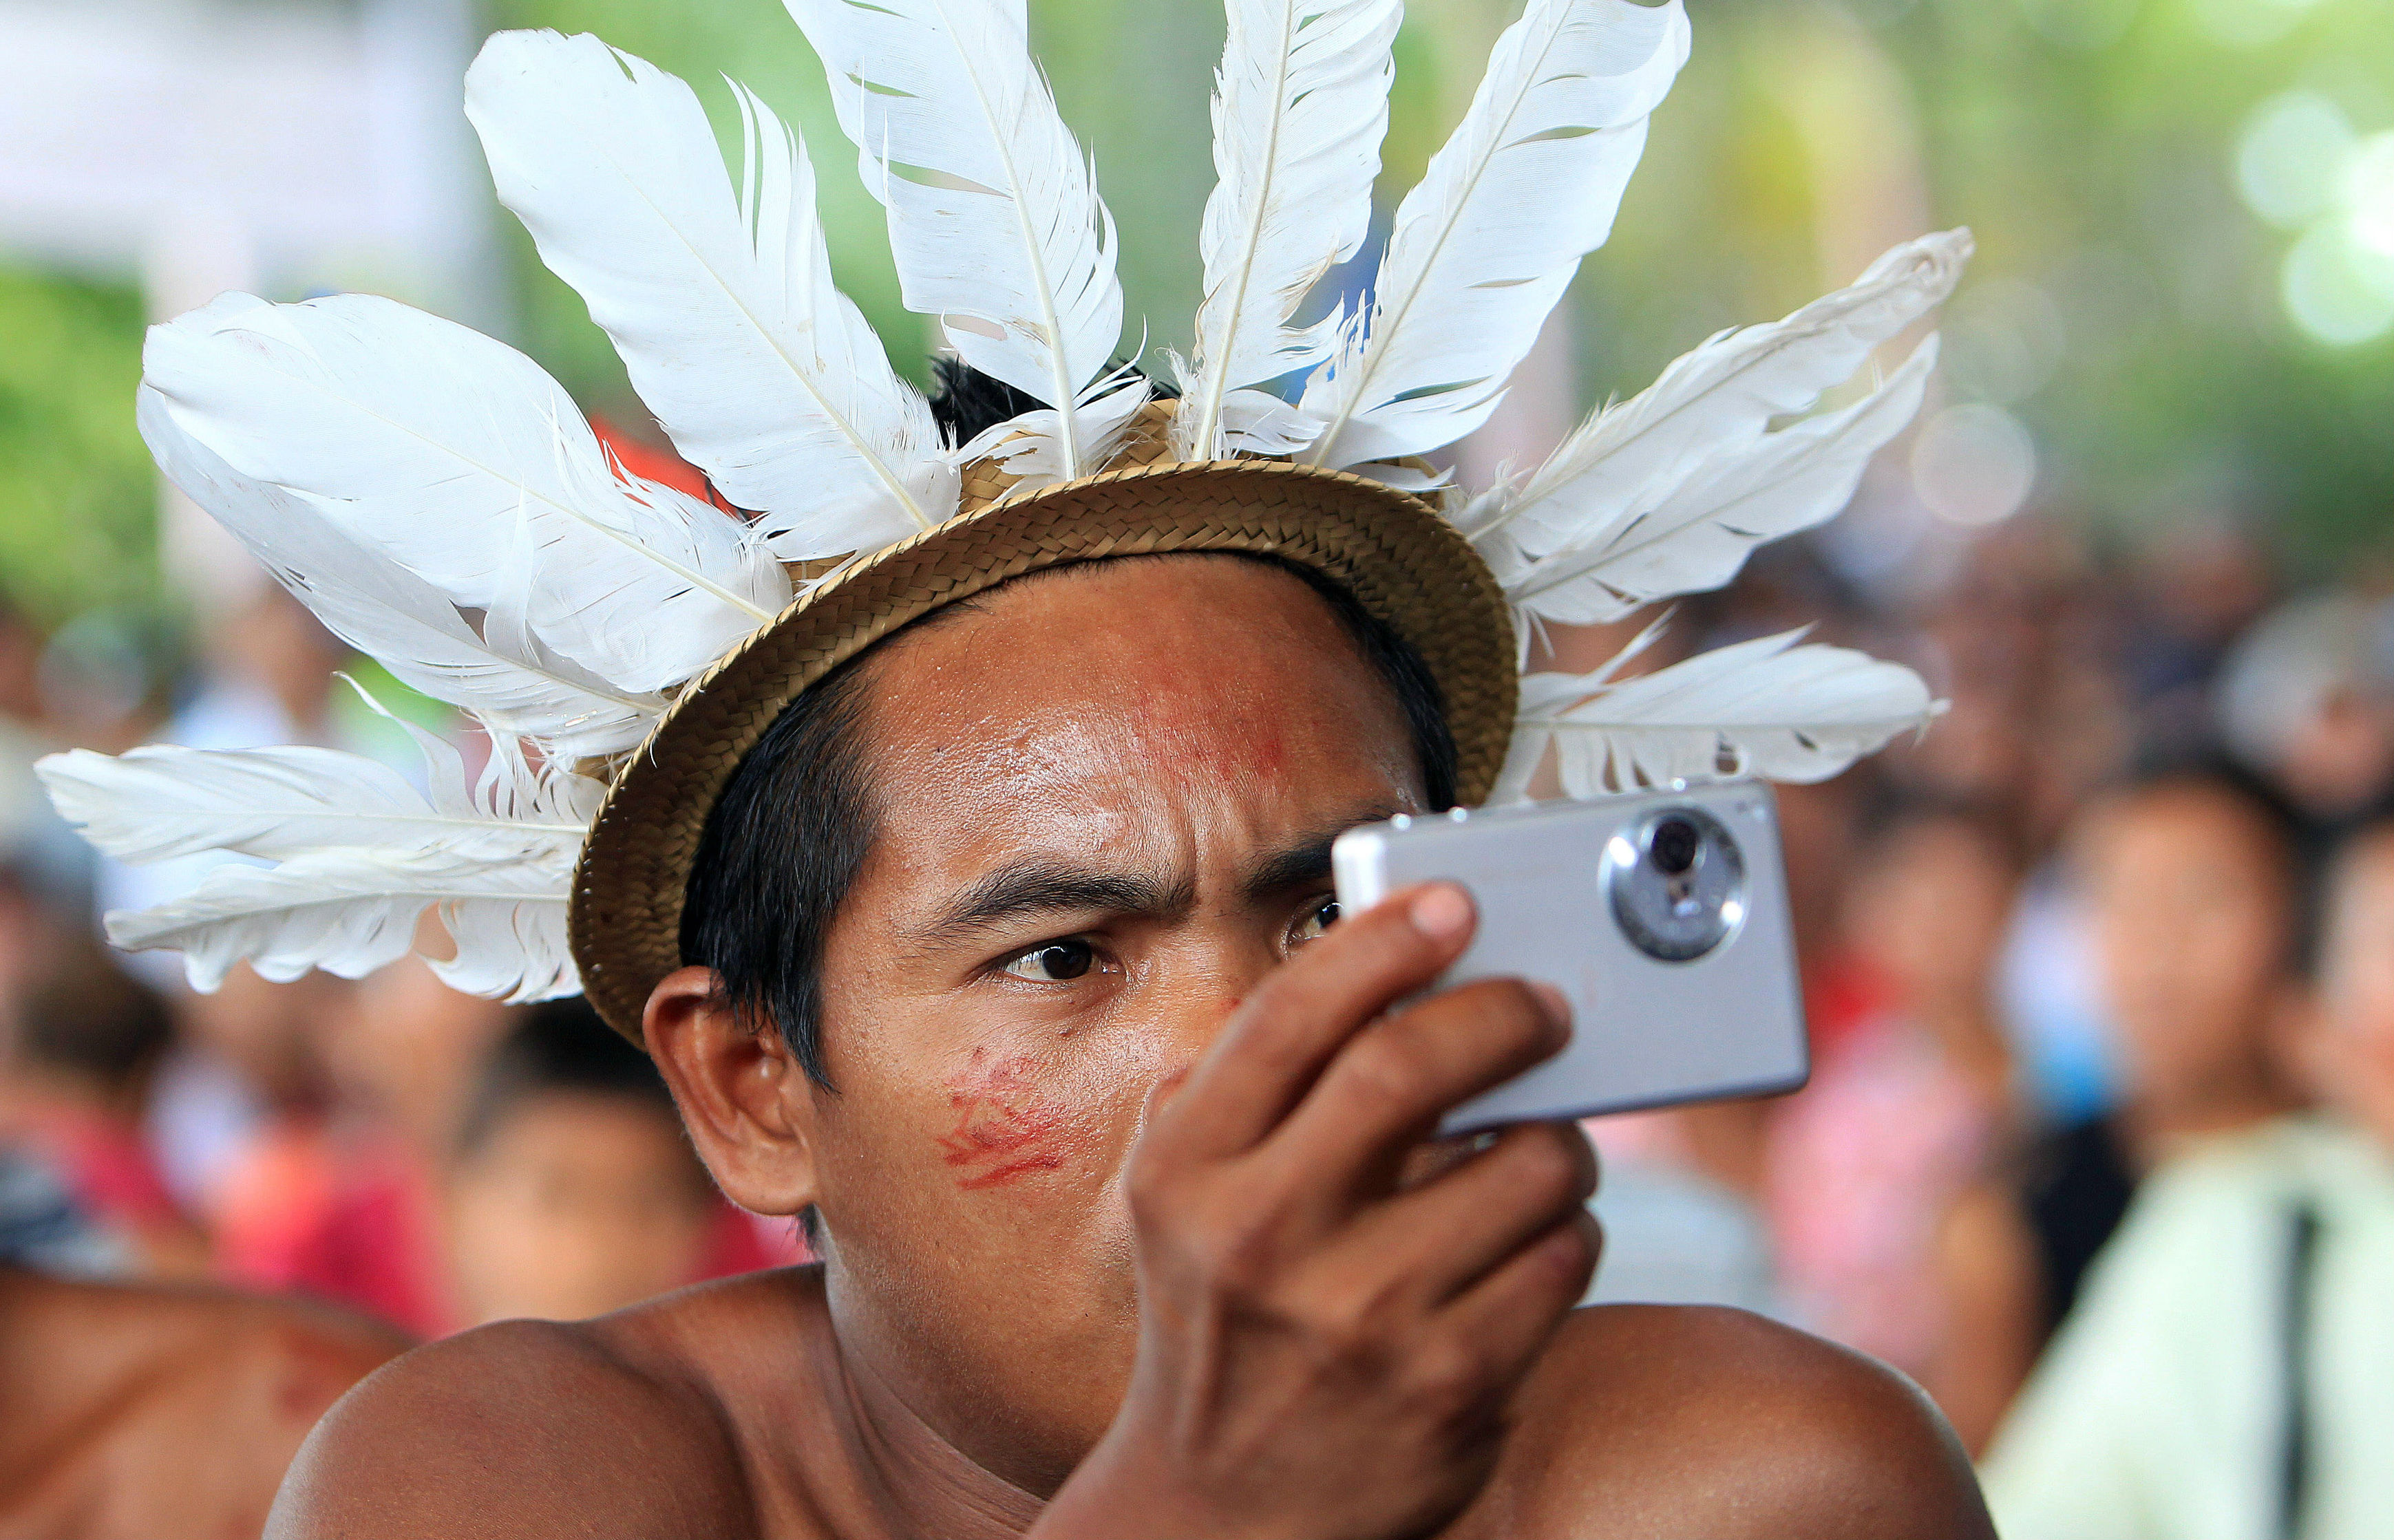 Pope wants synod dedicated to people in Amazon, archbishop says